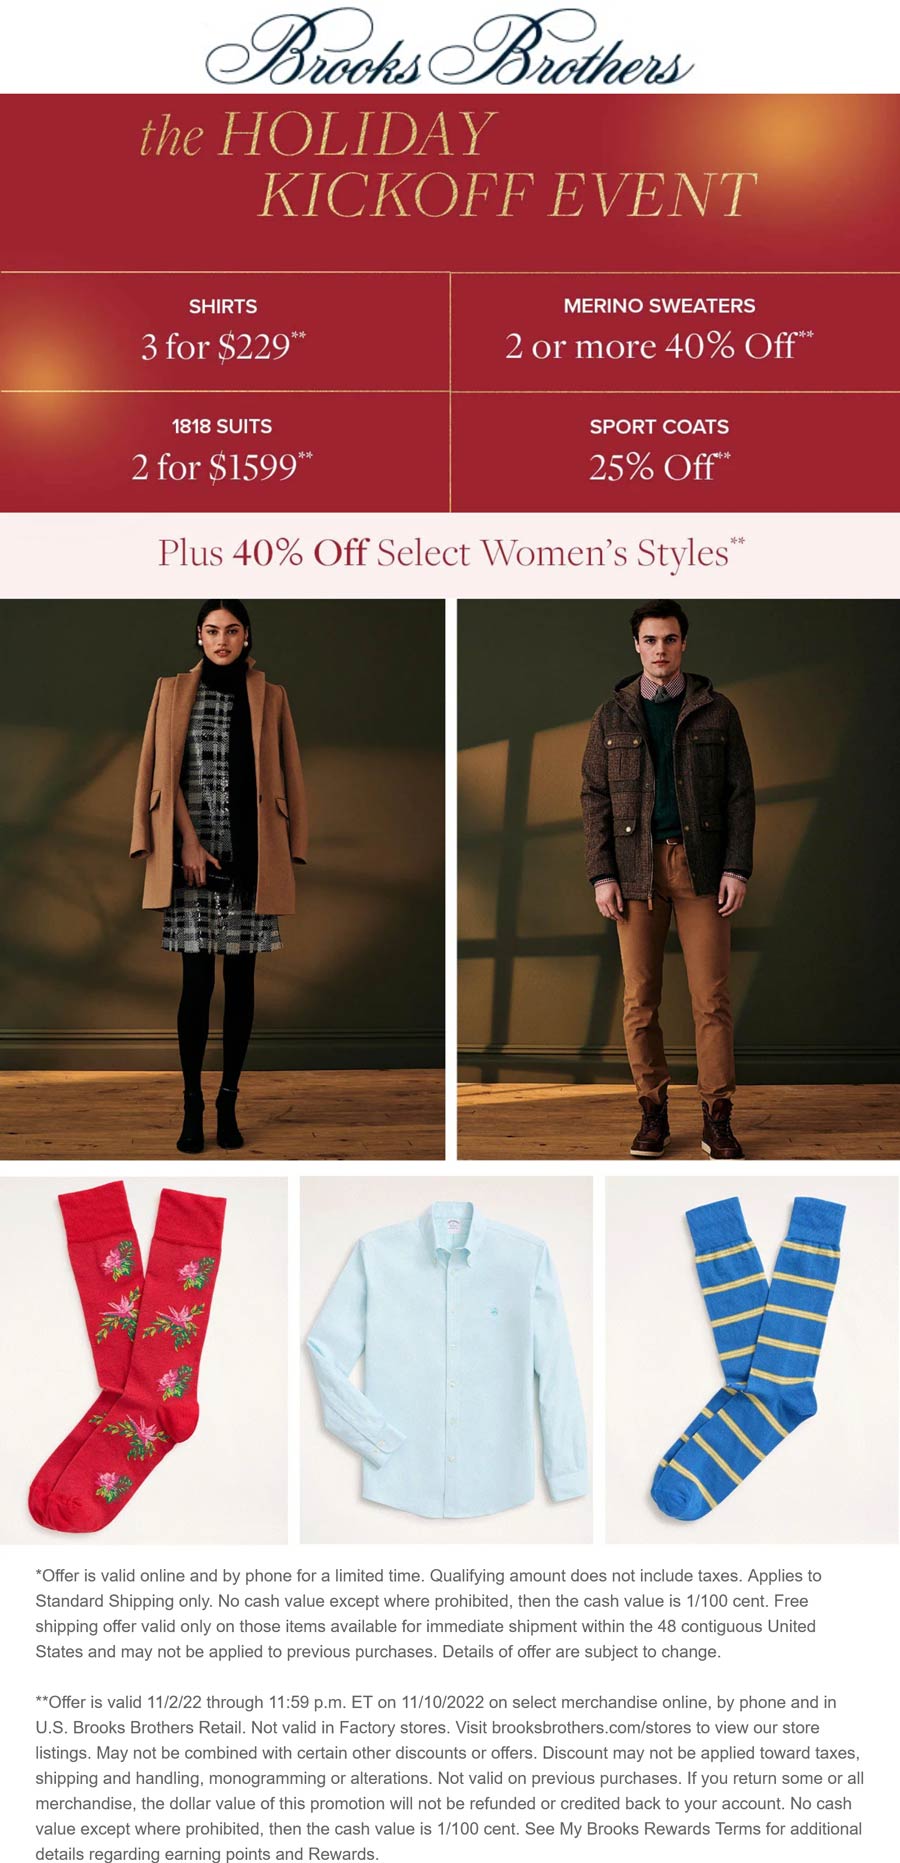 Brooks Brothers stores Coupon  25% off sport coats & more at Brooks Brothers, ditto online #brooksbrothers 